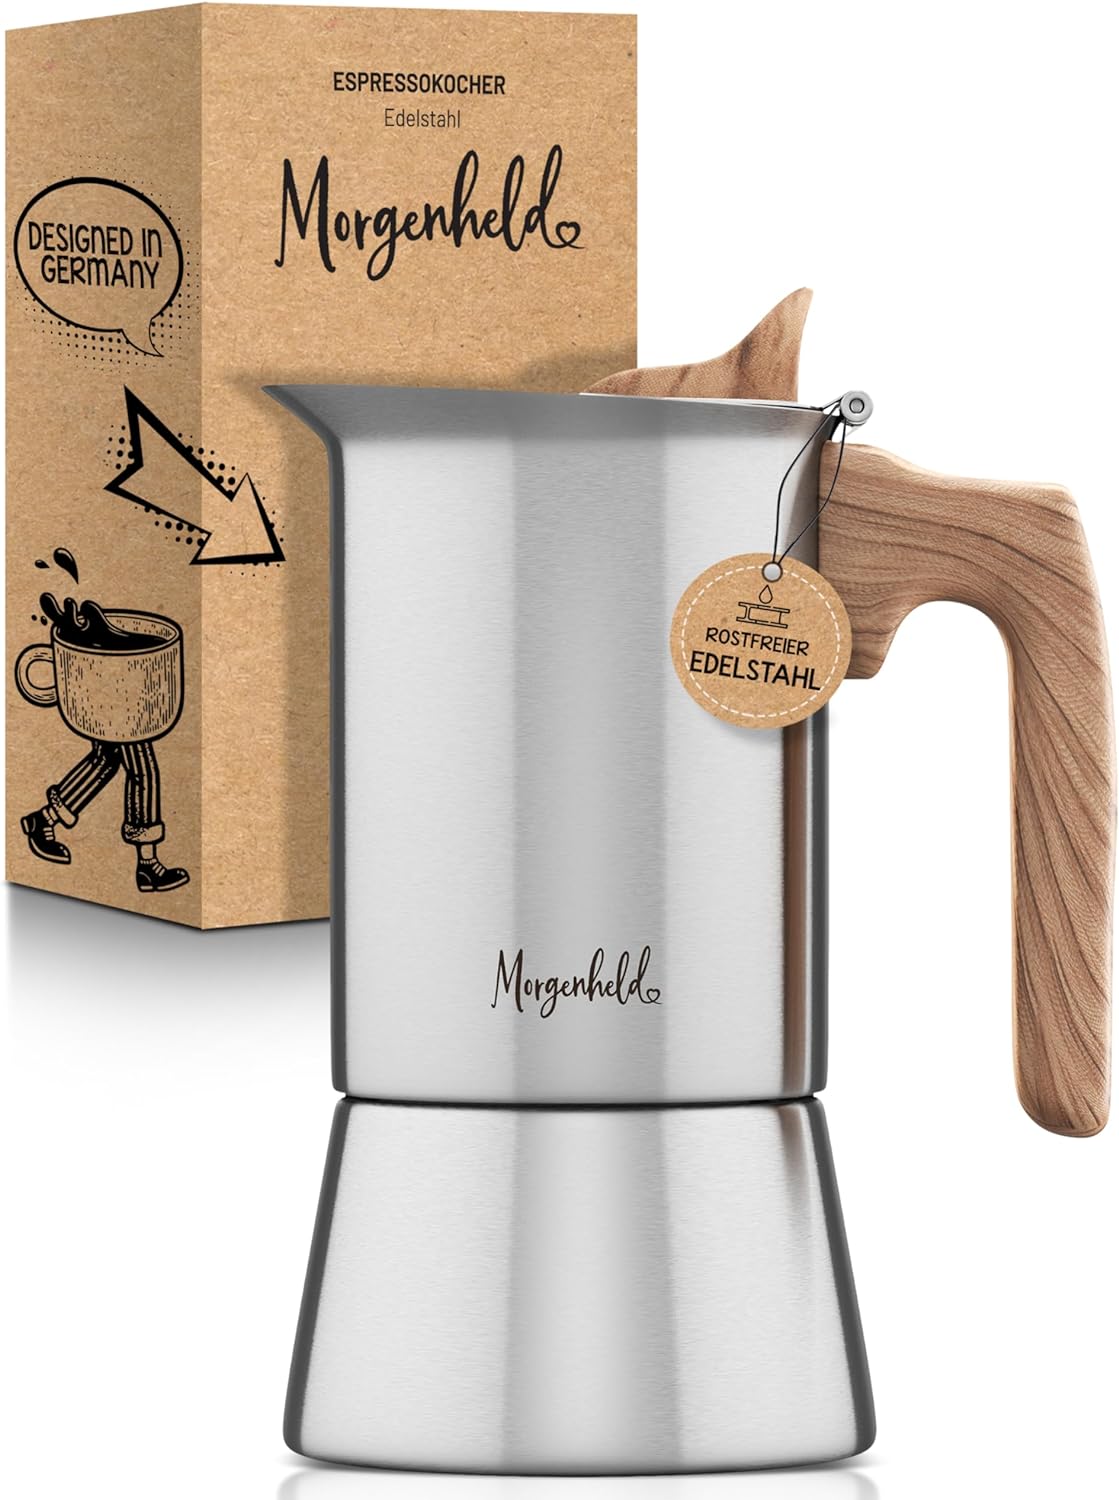 Morgenheld Espresso Maker for 4 Cups [200 ml] Made of Rustproof Stainless Steel - Mocha Pot, Espresso Jug Suitible for All Hob Types - Dishwasher Safe